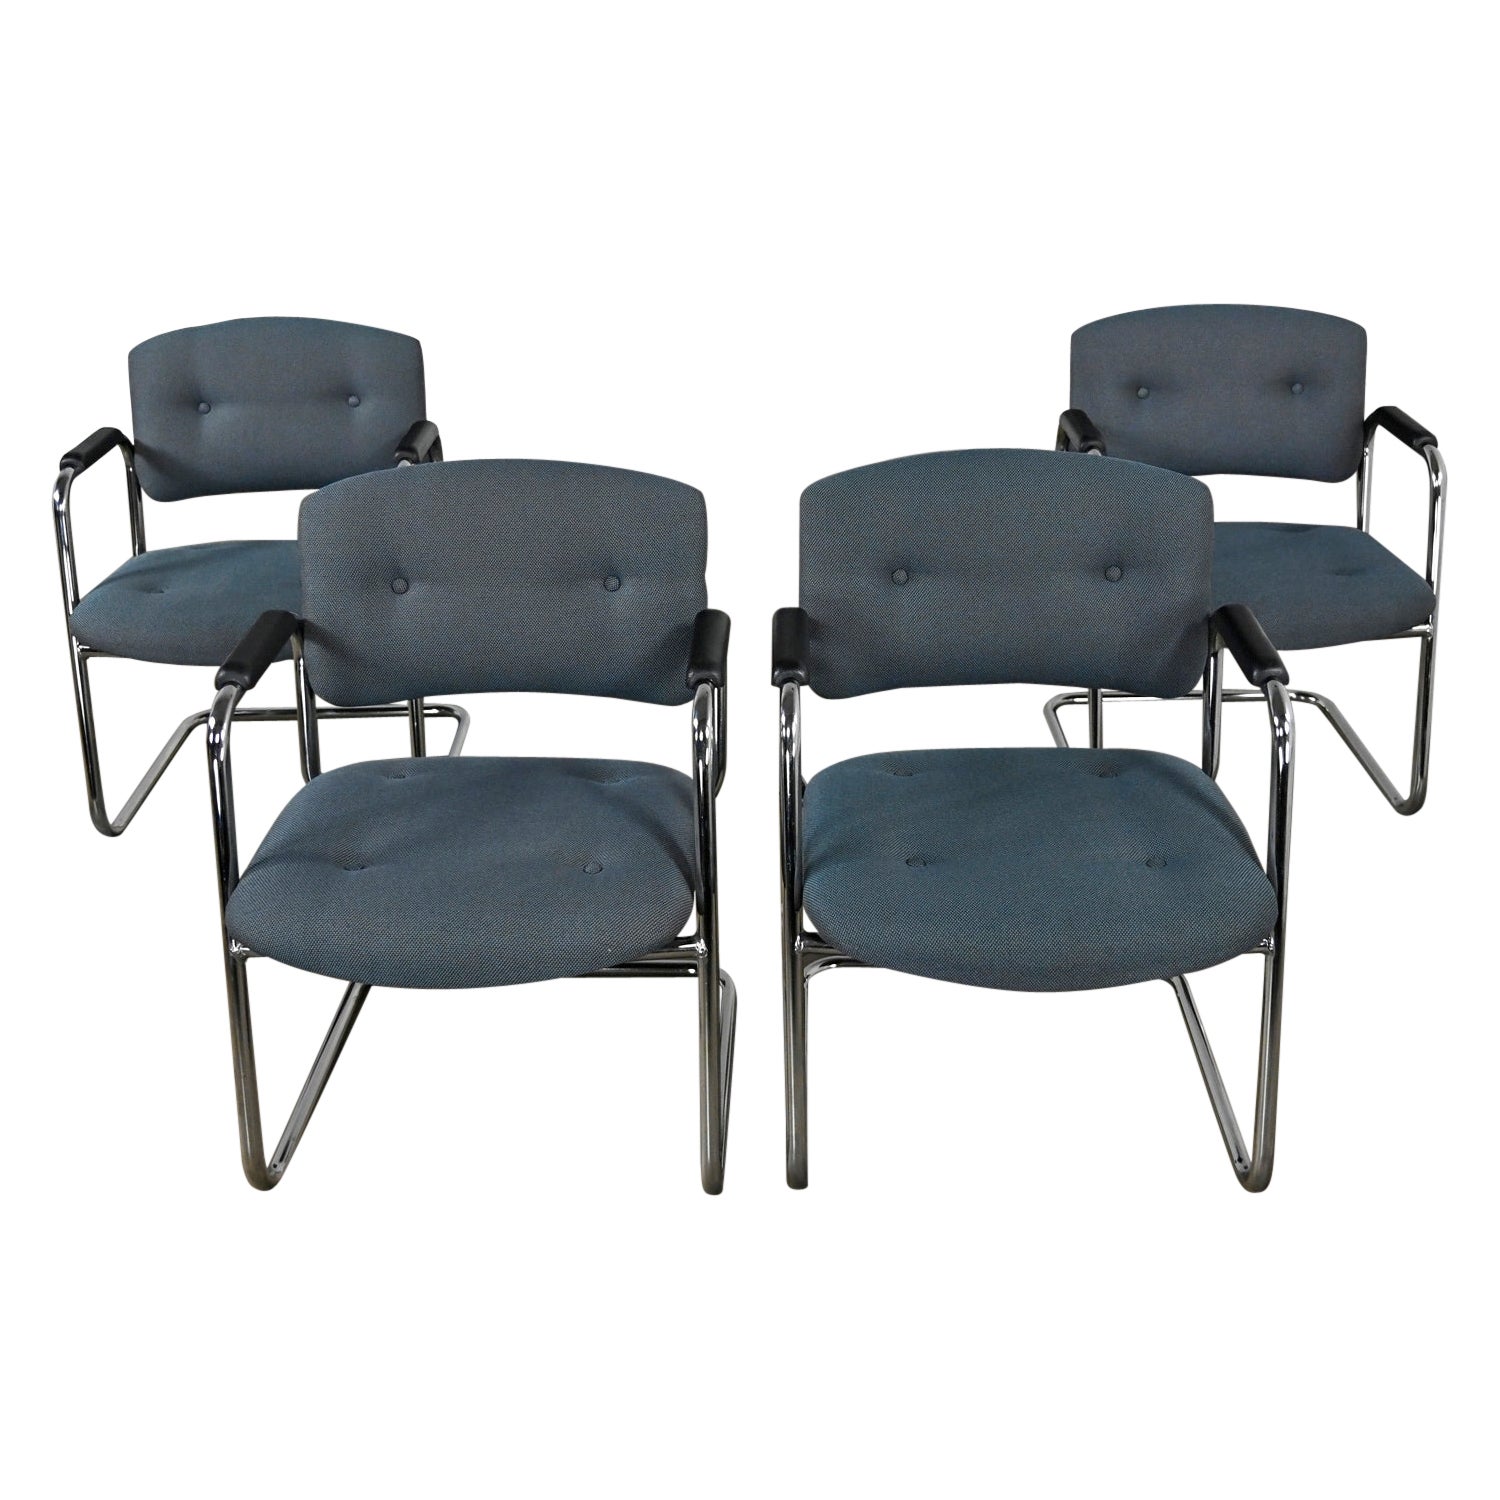 Late 20th Century Gray & Chrome Cantilever Chairs Style Steelcase Set of 4 For Sale